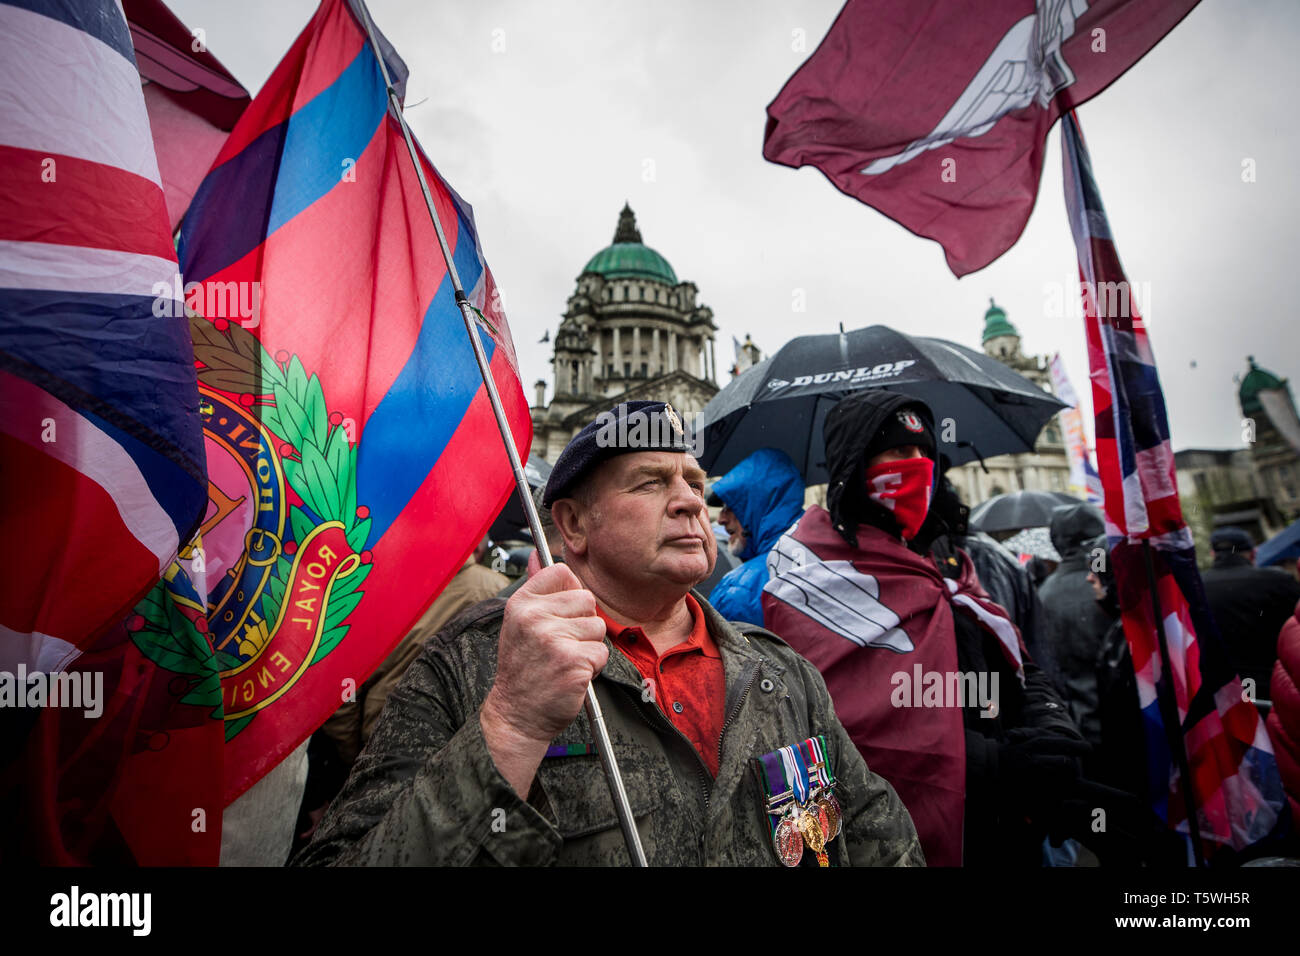 British army veteran stands holding the flag of Royal Engineers as he joins protesters outside Belfast City Hall, at a rally for a former paratrooper, soldier F, who is due to stand trial for murder and attempted murder for his role in the 1972 Bloody Sunday killings. Stock Photo